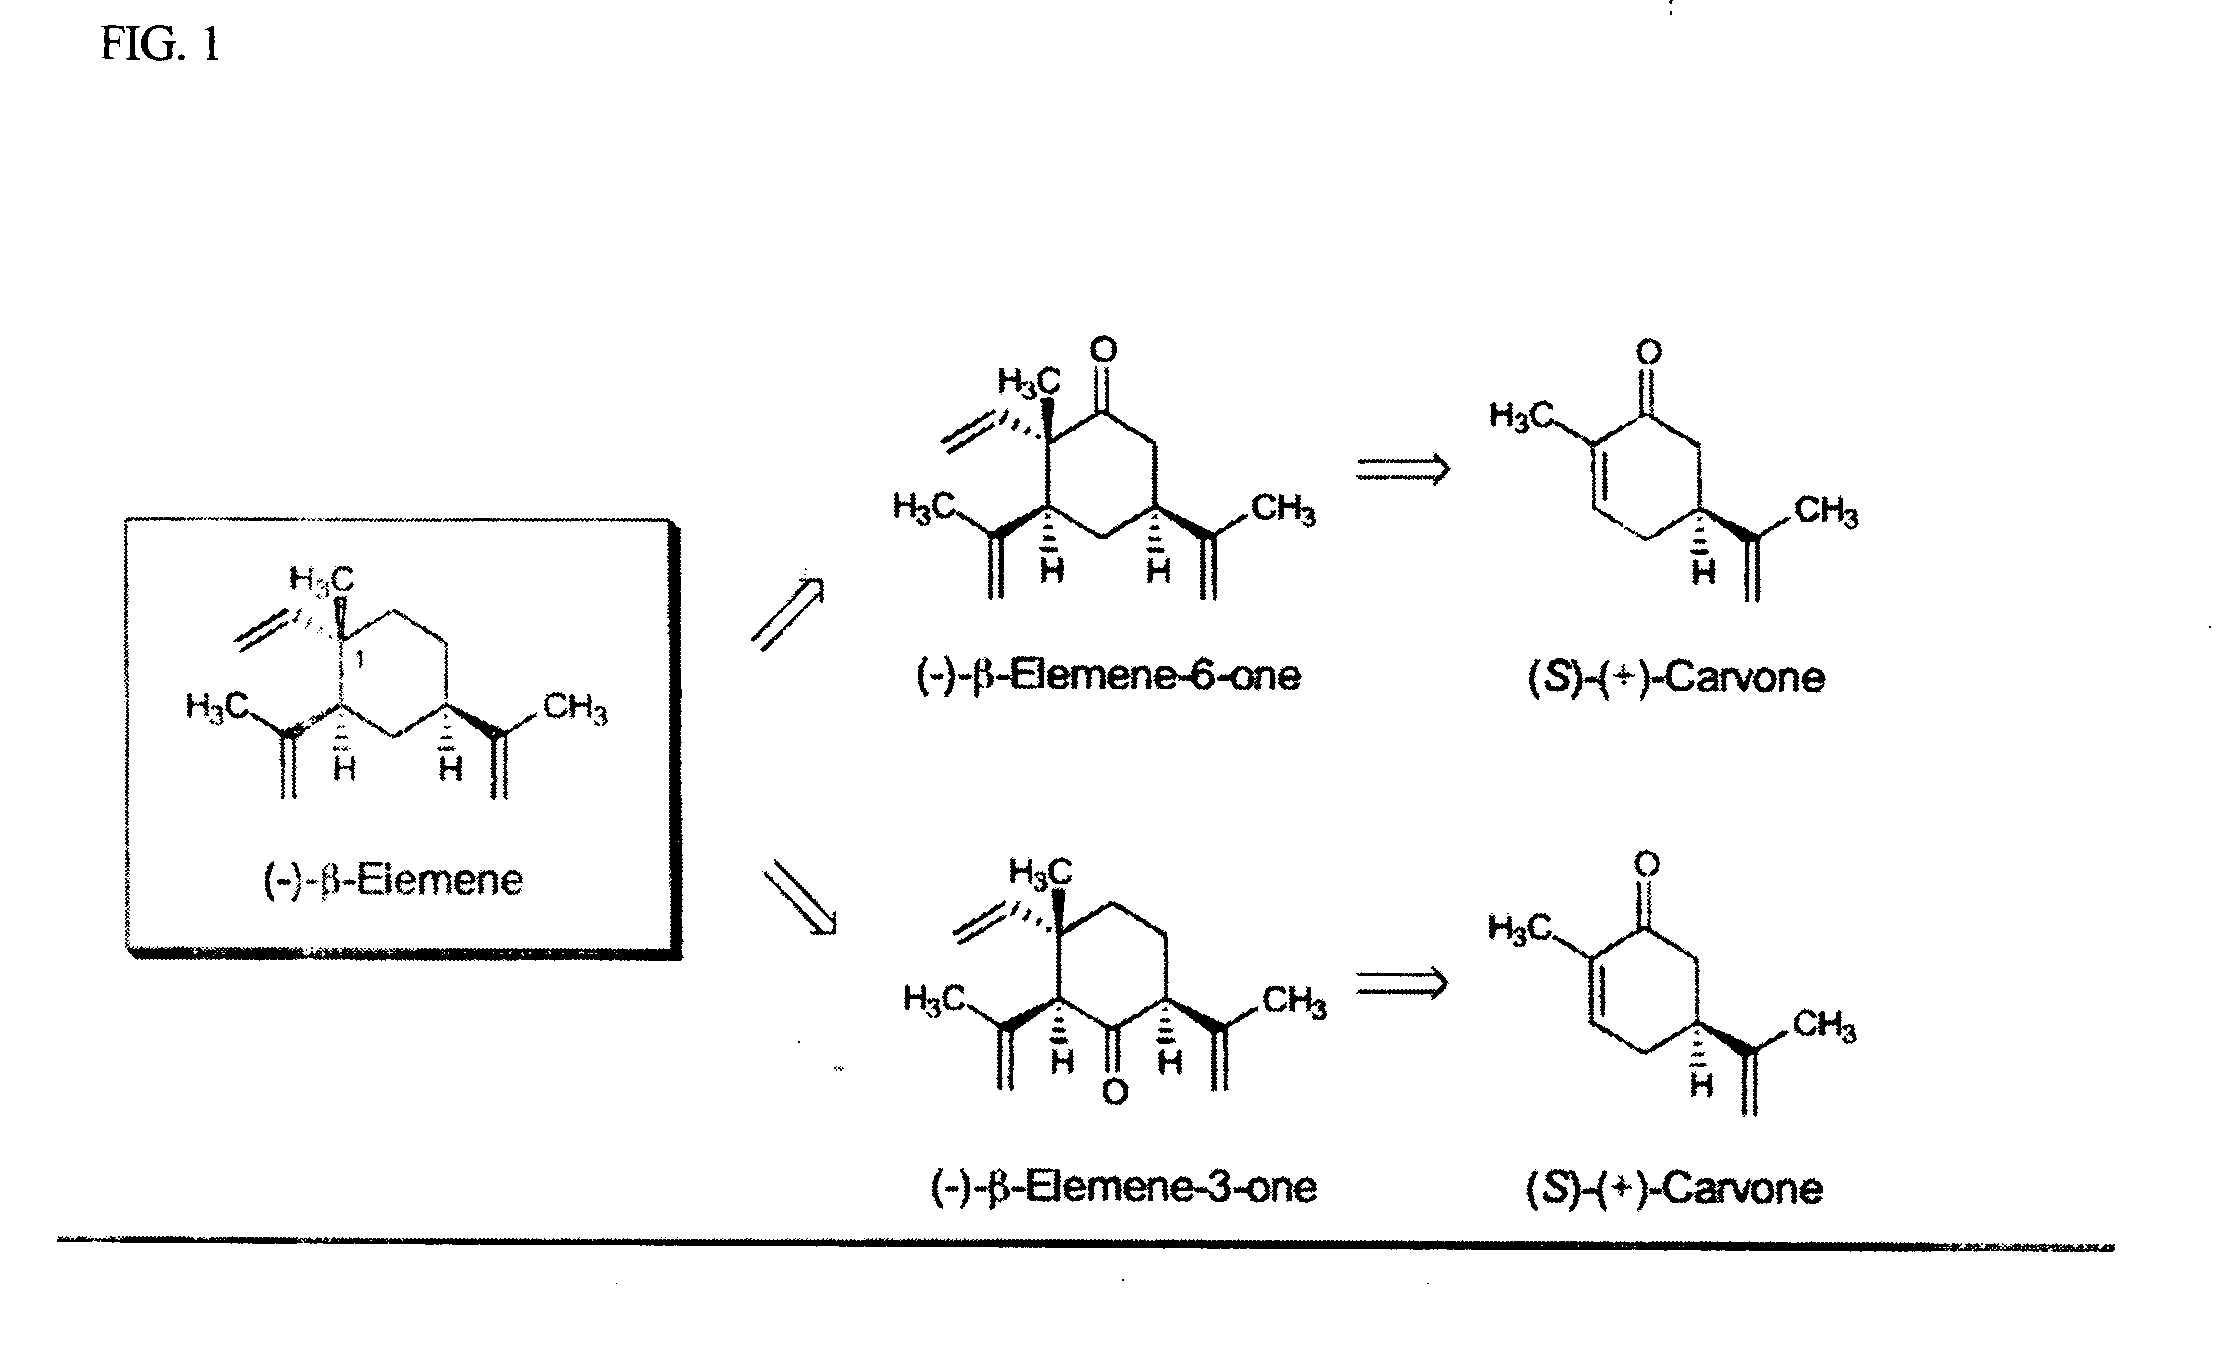 Synthesis of beta-elemene, intermediates thereto, analogues and uses thereof